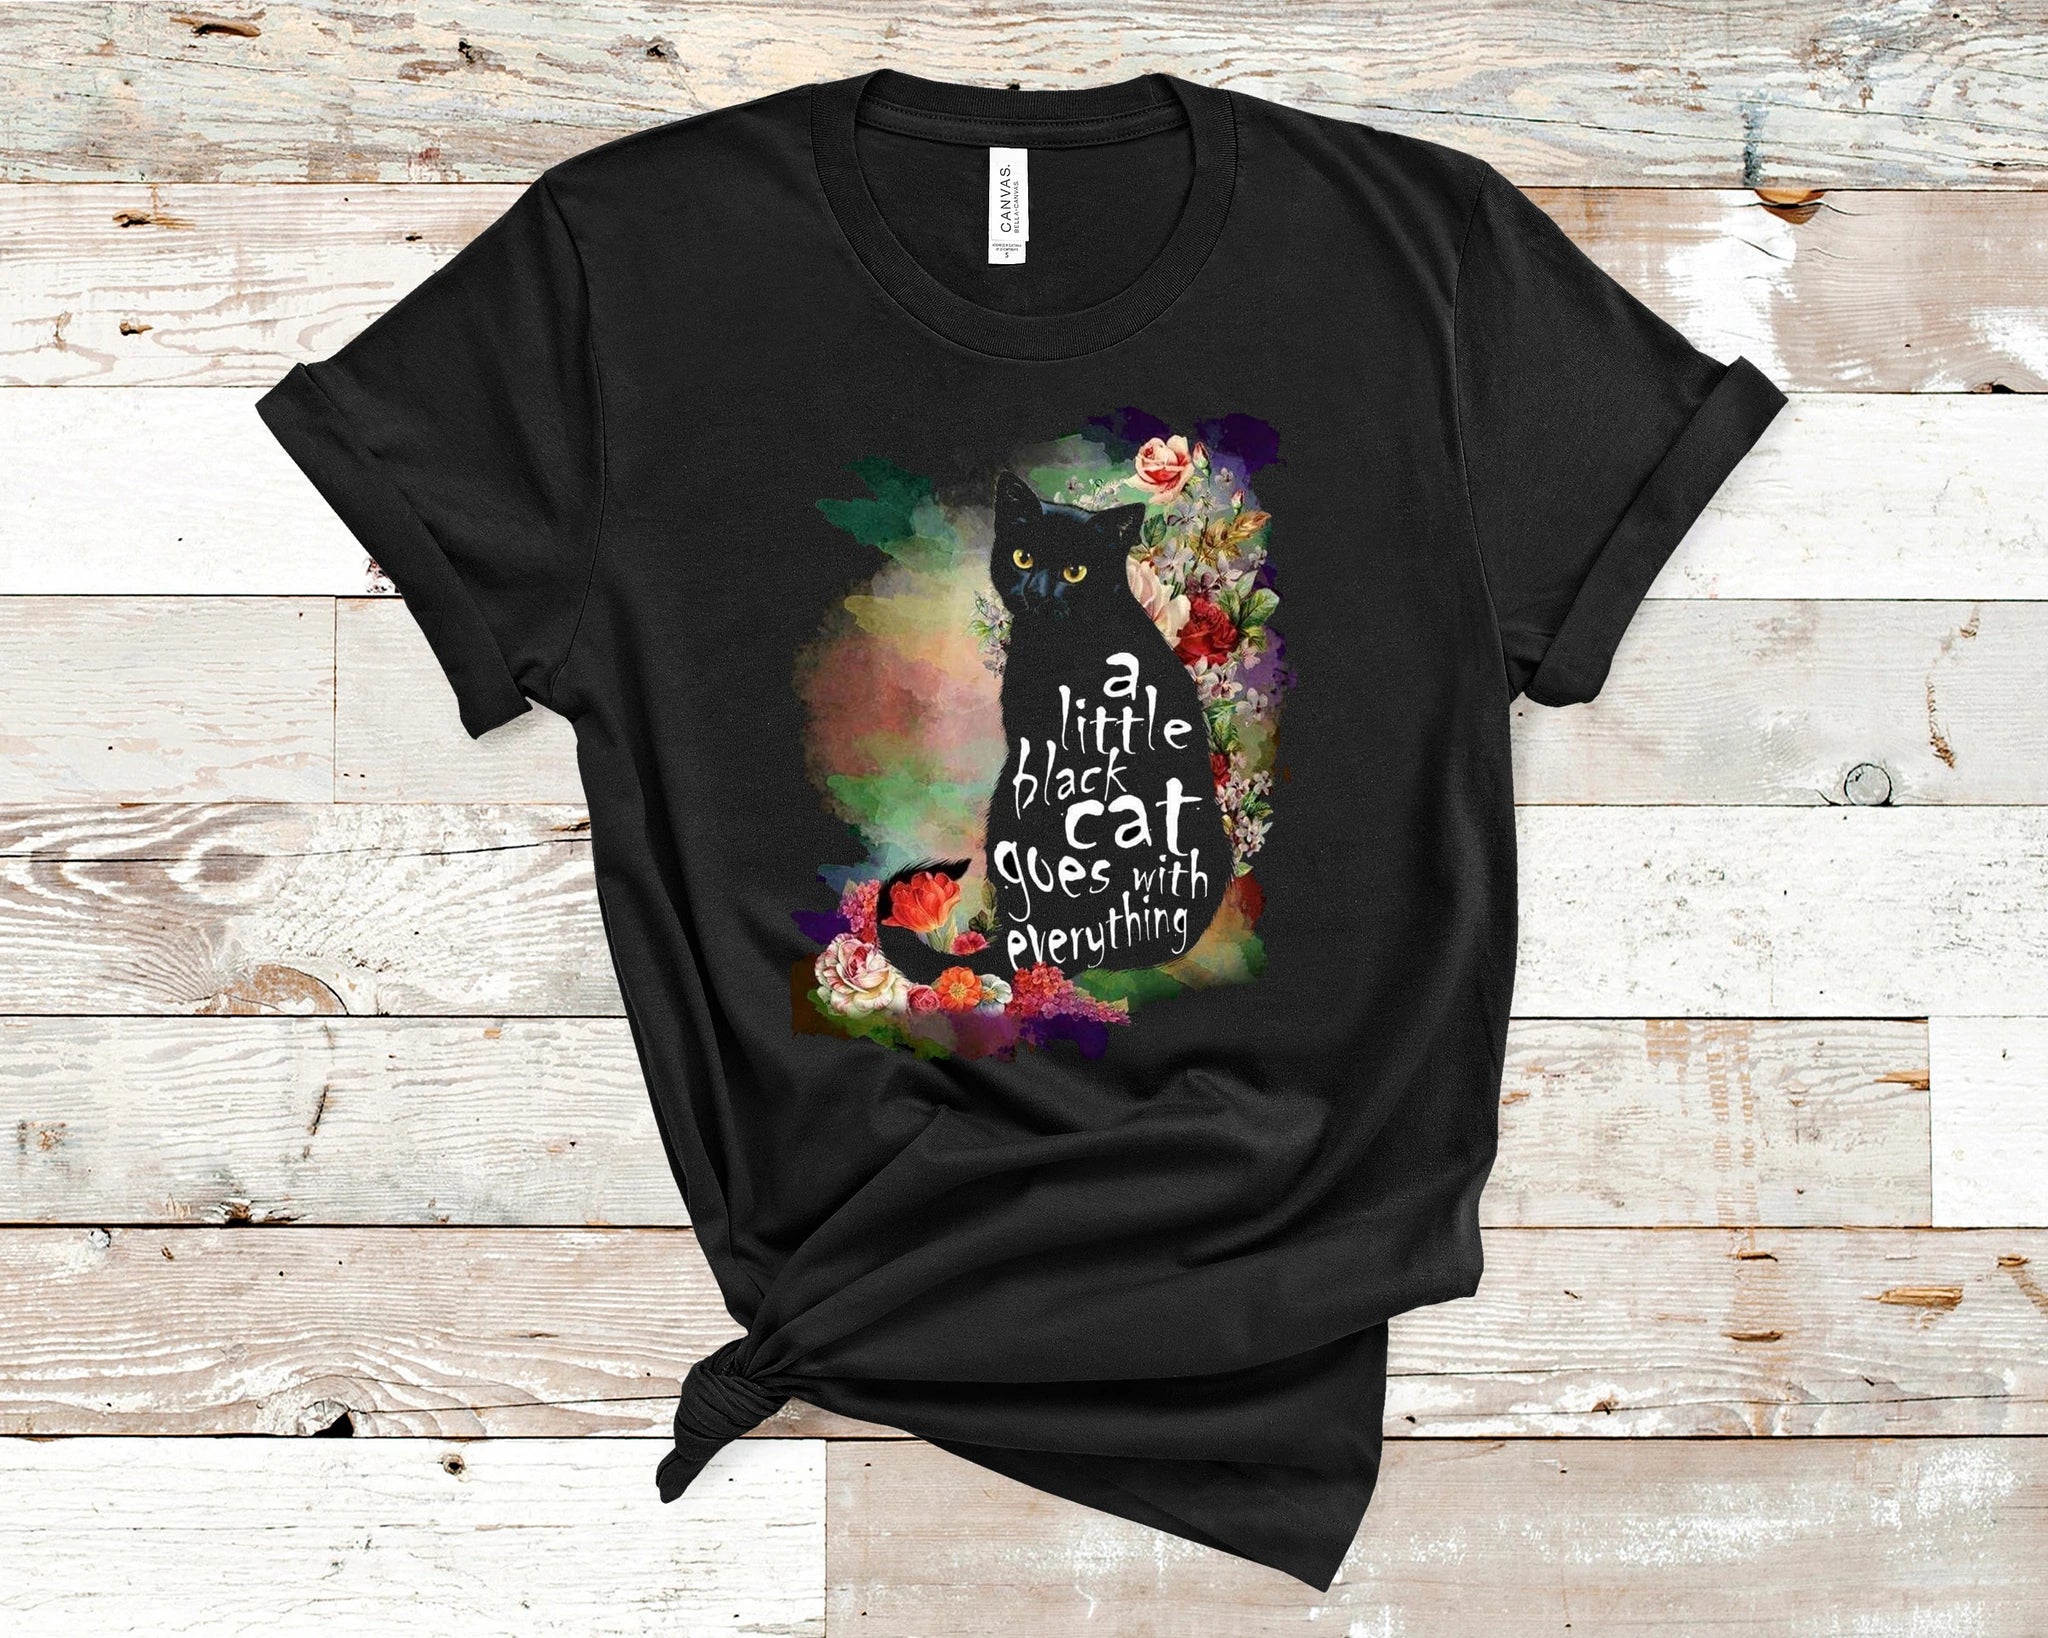 A Little Black Cat Goes With Eevrything T-Shirt Cute and Fun Custom Print Tee's - Arrow Trend Leggings